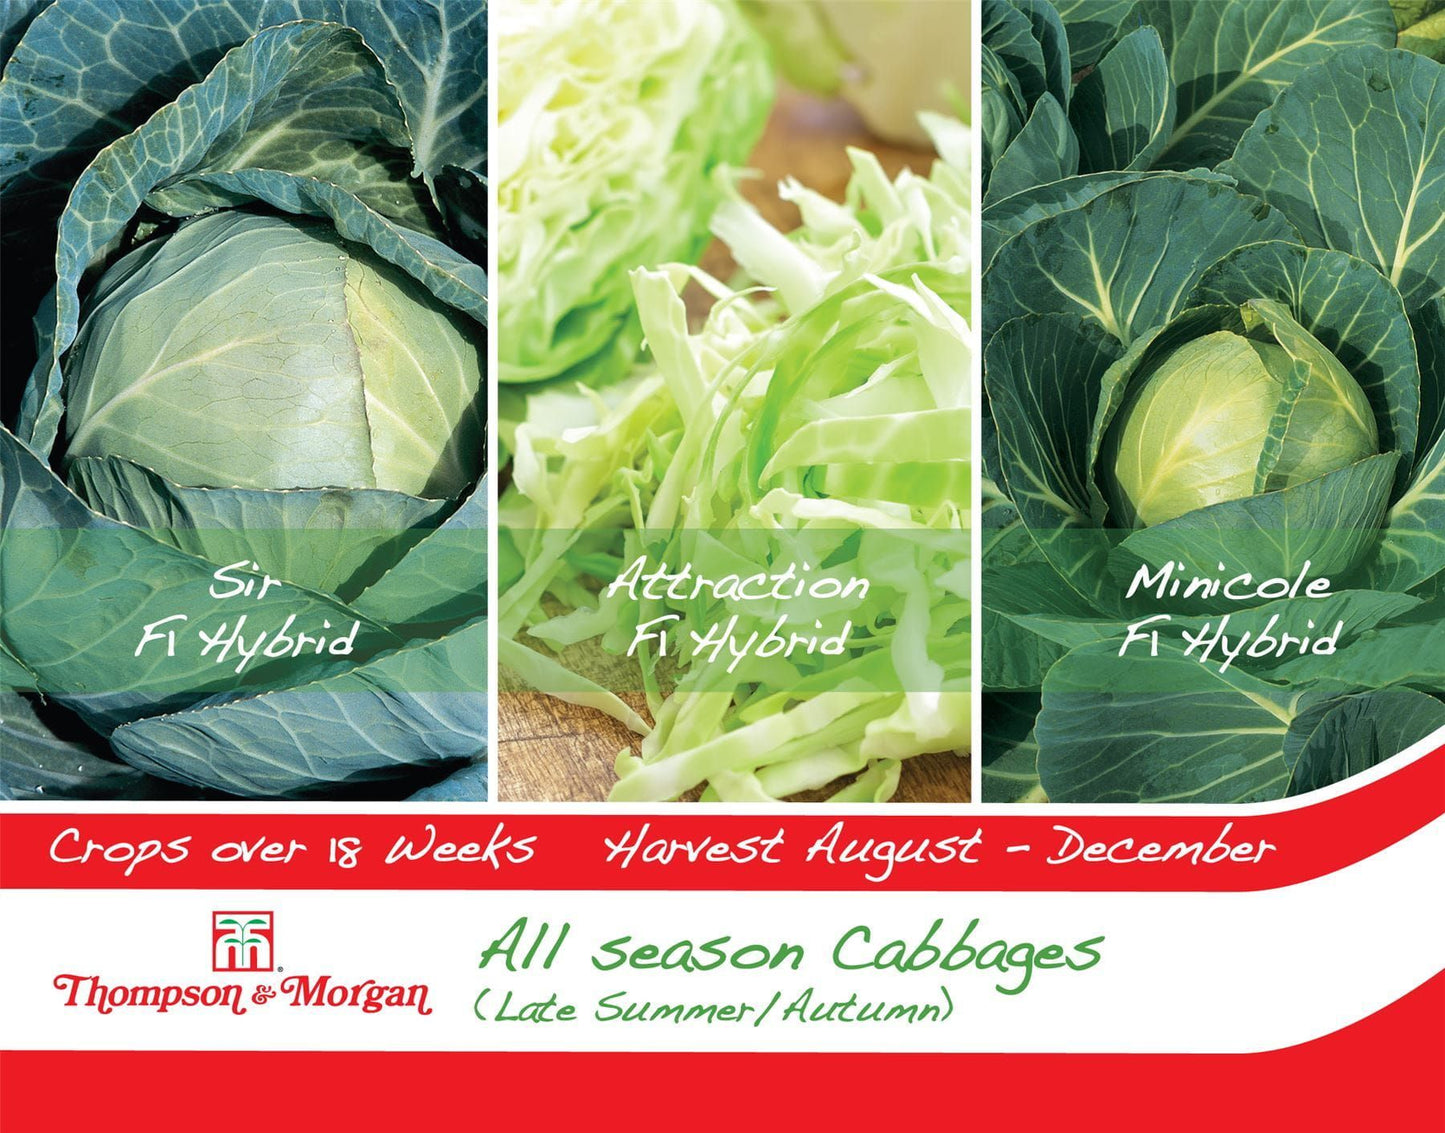 Thompson & Morgan - Vegetable - Cabbages (Late Summer/Autumn) - All Season - 35 Seeds